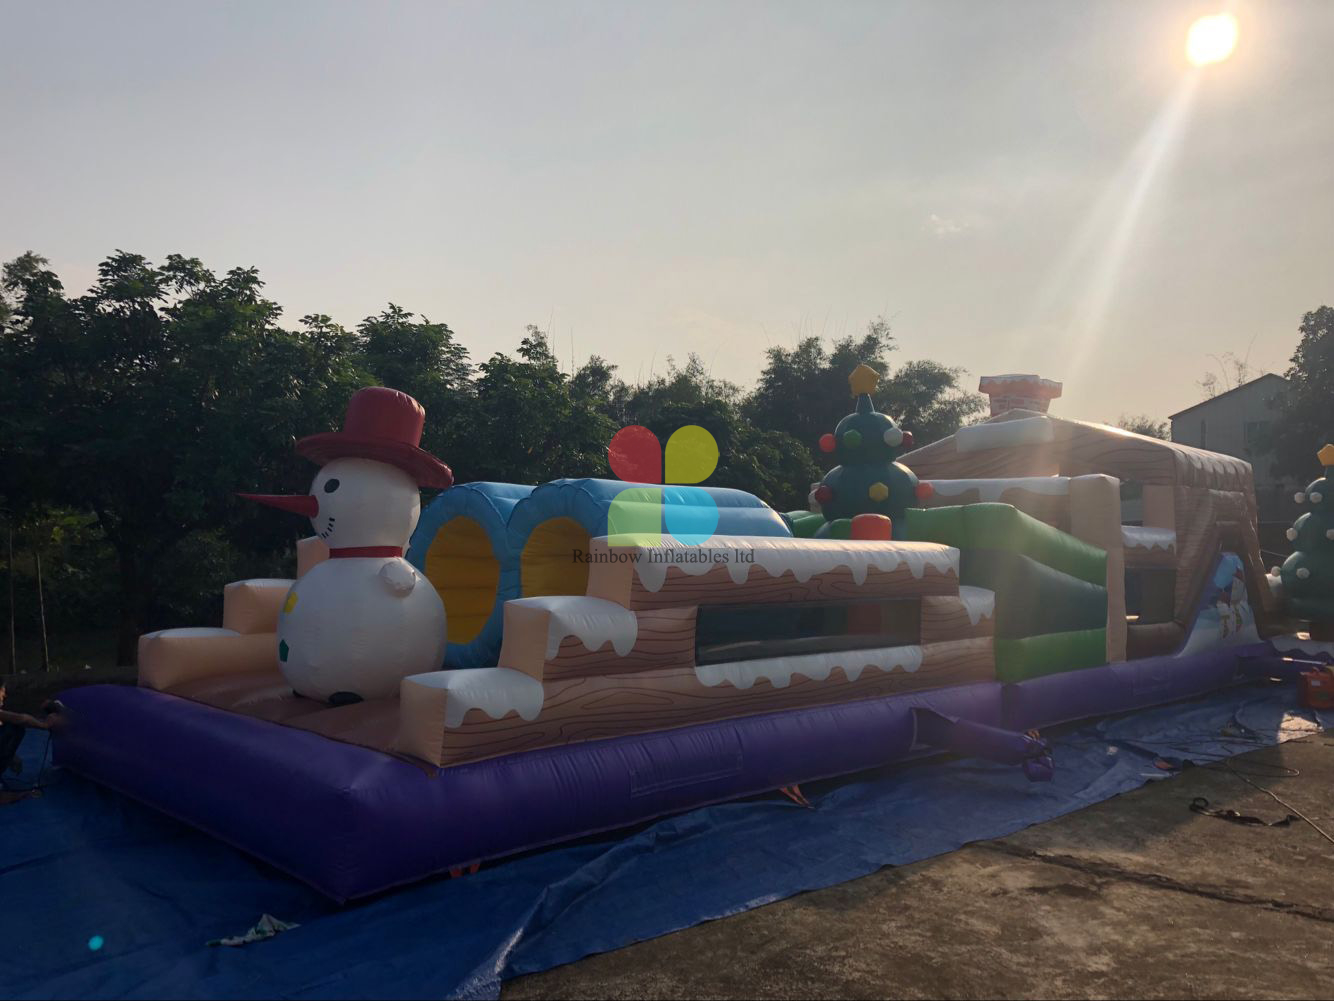 Inflatable Christmas Long Obstacle Course for Kids